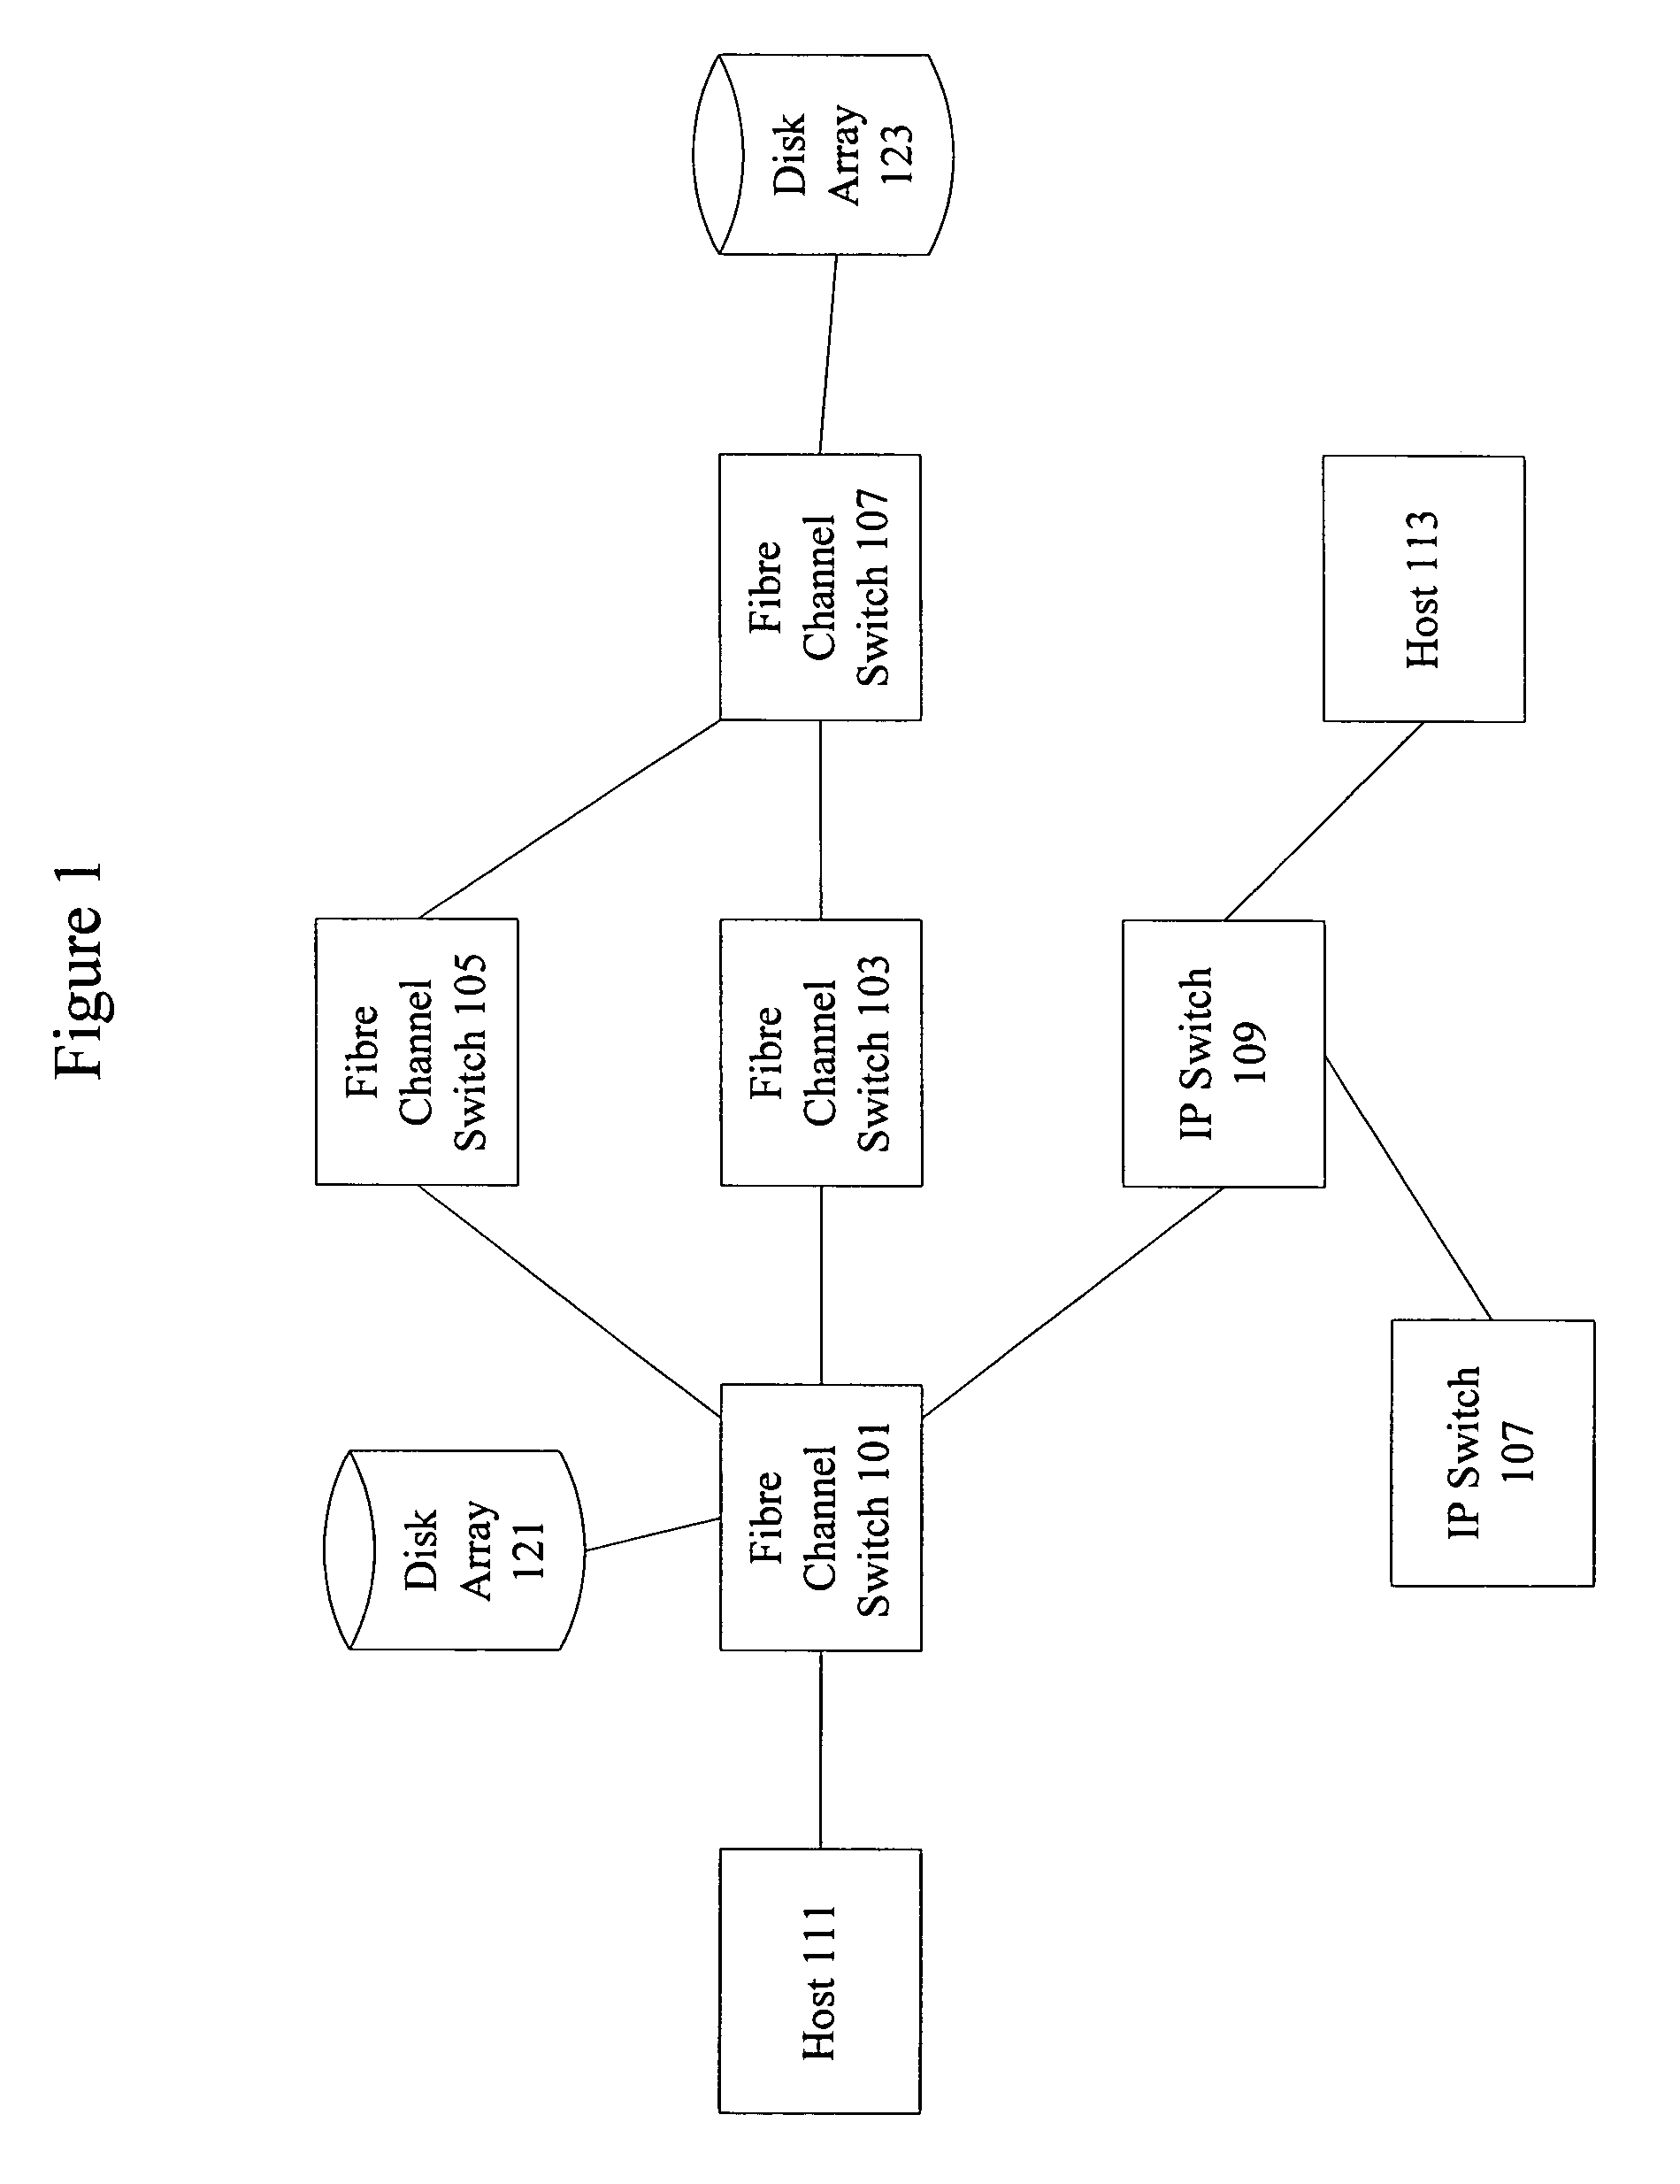 Intelligent event notification processing and delivery at a network switch